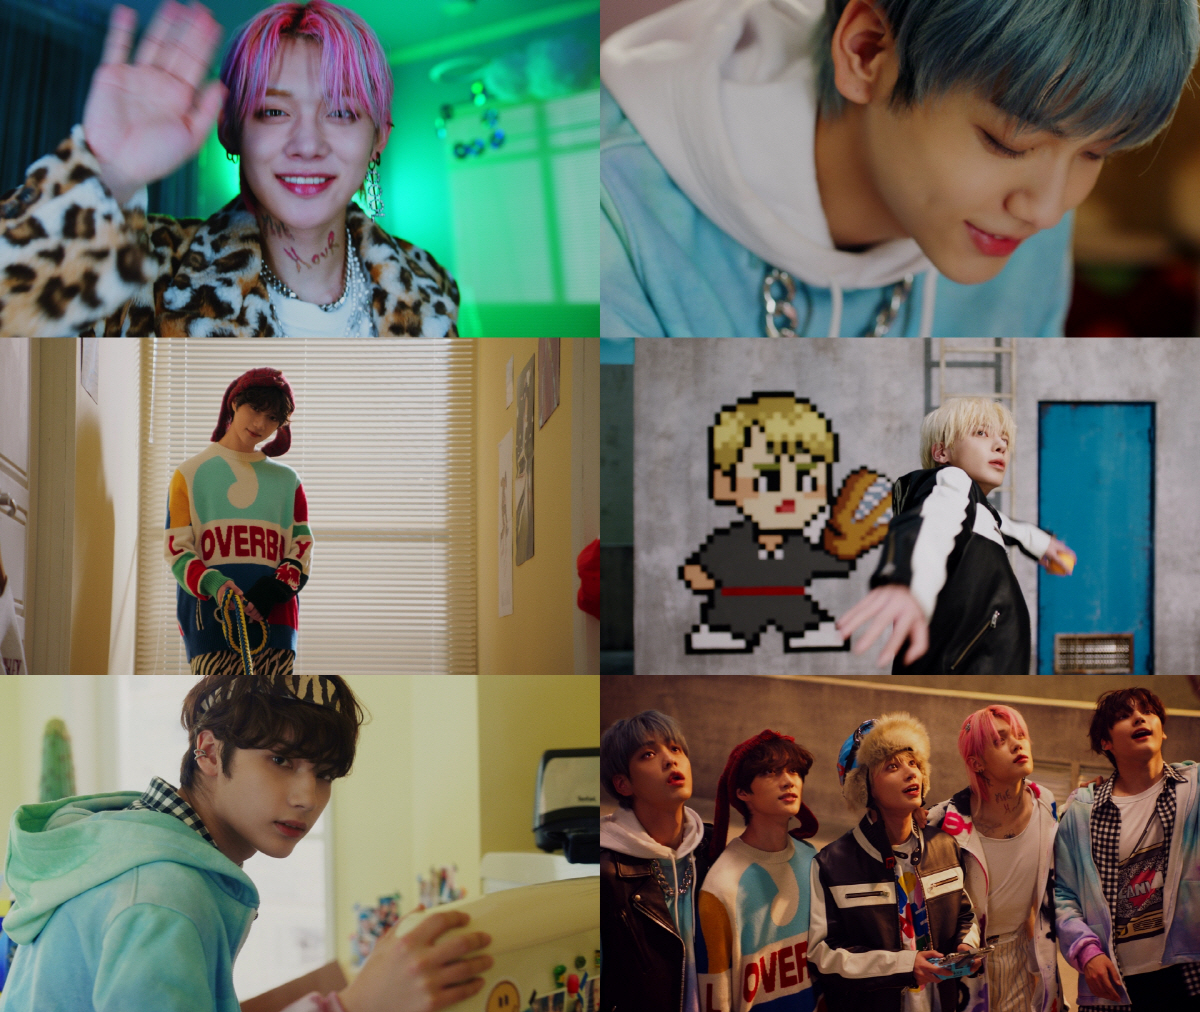 Group TOMORROW X Twogether released a teaser video of the new album I lost the weather.TOMORROW X Twogether (Subin, Yeonjun, Bumgyu, Taehyun, and Huening Kai) presented a Teaser video of Lost the Weather on their third mini album minisode1: Blue Hour on the official SNS channel at 0:00 on the 10th.The public footage begins with the appearance of TOMORROW X Twogether, who greets the Online World.The five members gather to take pictures and enjoy the time Twogether, and the way they spend time alone in their own space, creating a conflicting atmosphere.Then, when Huening Kai opens his eyes, he wakes up from his dream and ends up with his members again, adding to his curiosity about the story.In particular, this Teaser video has raised the expectation of the music video, which shows the way the members appear through the online space or mobile phone screen along with the warm visuals of the five members.I lost the weather is a song that solves the story of teenagers facing a completely different world due to Corona 19 fandemic.It seems that the anxiety and confusion felt after the daily life that I took for granted disappear will be expressed in the lyrics and the sympathy of the listeners will be obtained.On the other hand, TOMORROW X Twogether, which has been showing steady growth with the Dream Chapter series since its debut, has proved its unique presence by establishing its own record of 300,000 copies in its first week with minisode1: Blue Hour released on the 26th of last month.It also topped the iTunes top album chart in all 30 countries and regions of World, and also topped the Oricon Daily and weekly album charts in Japan, and has gained explosive popularity in all Worlds.